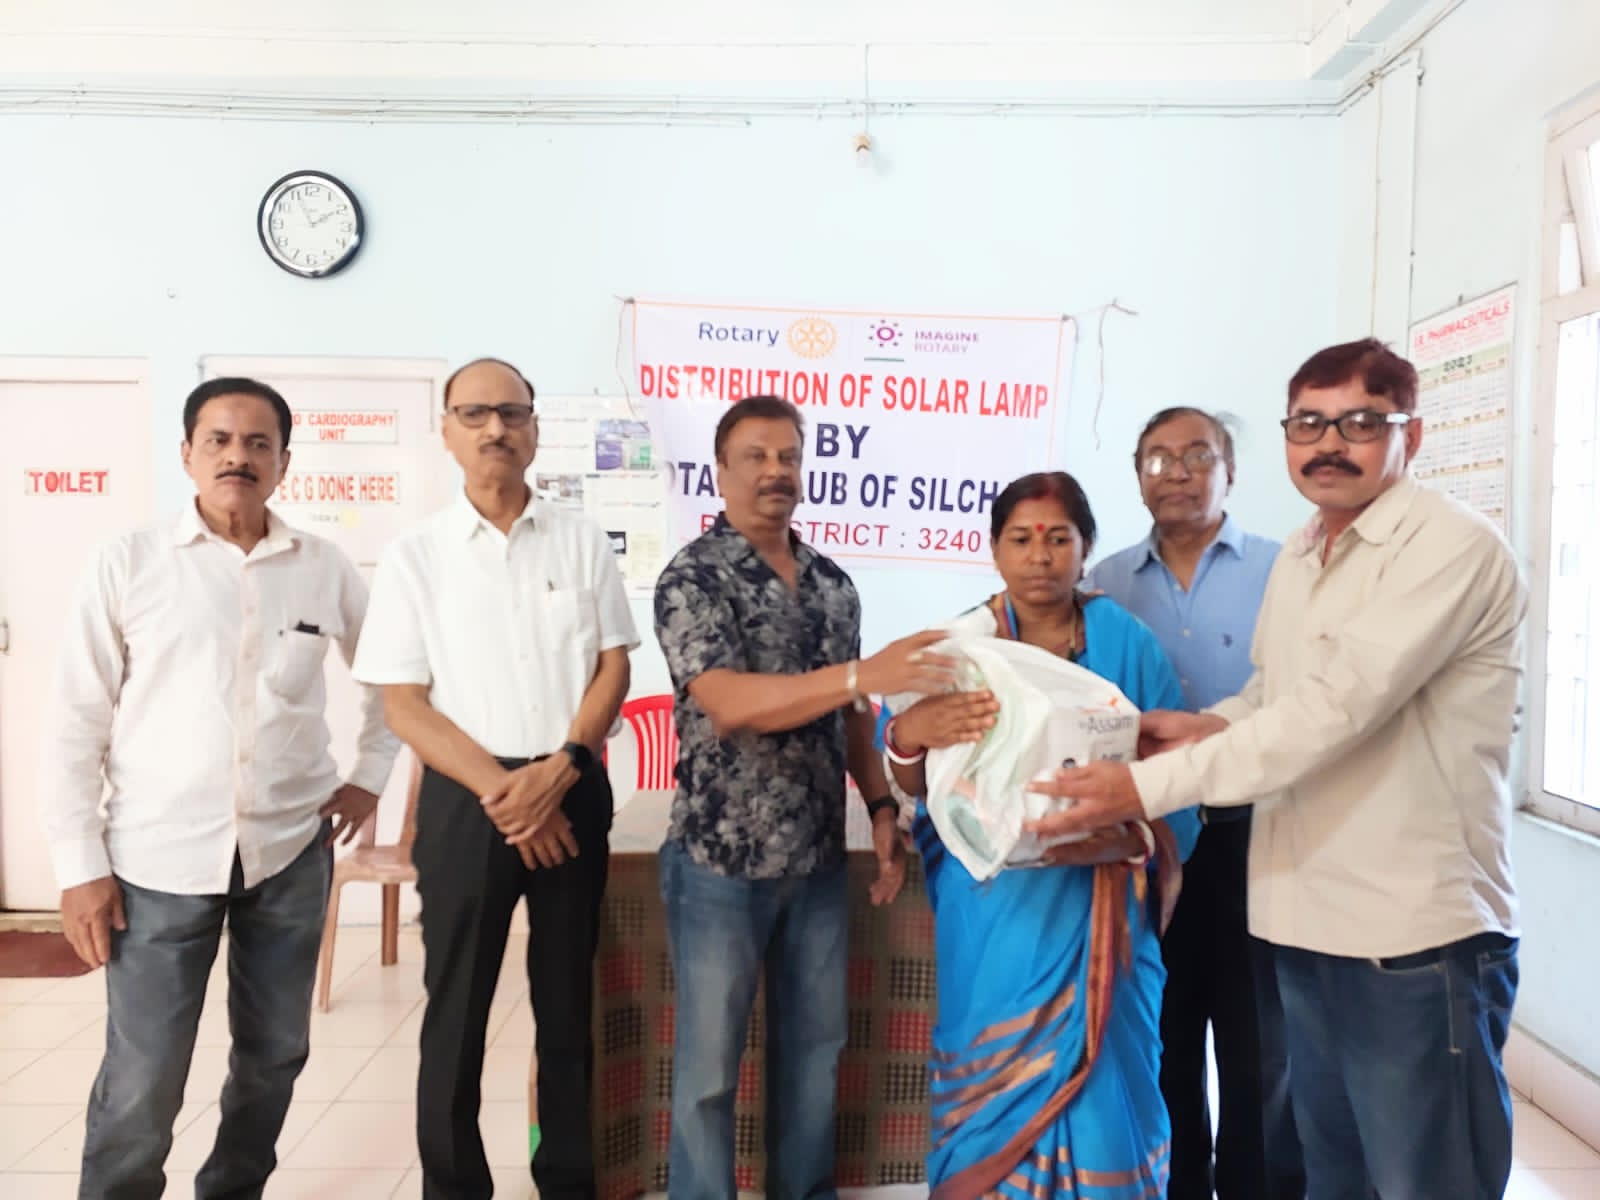 Distribution of Solar lamps to the needy families